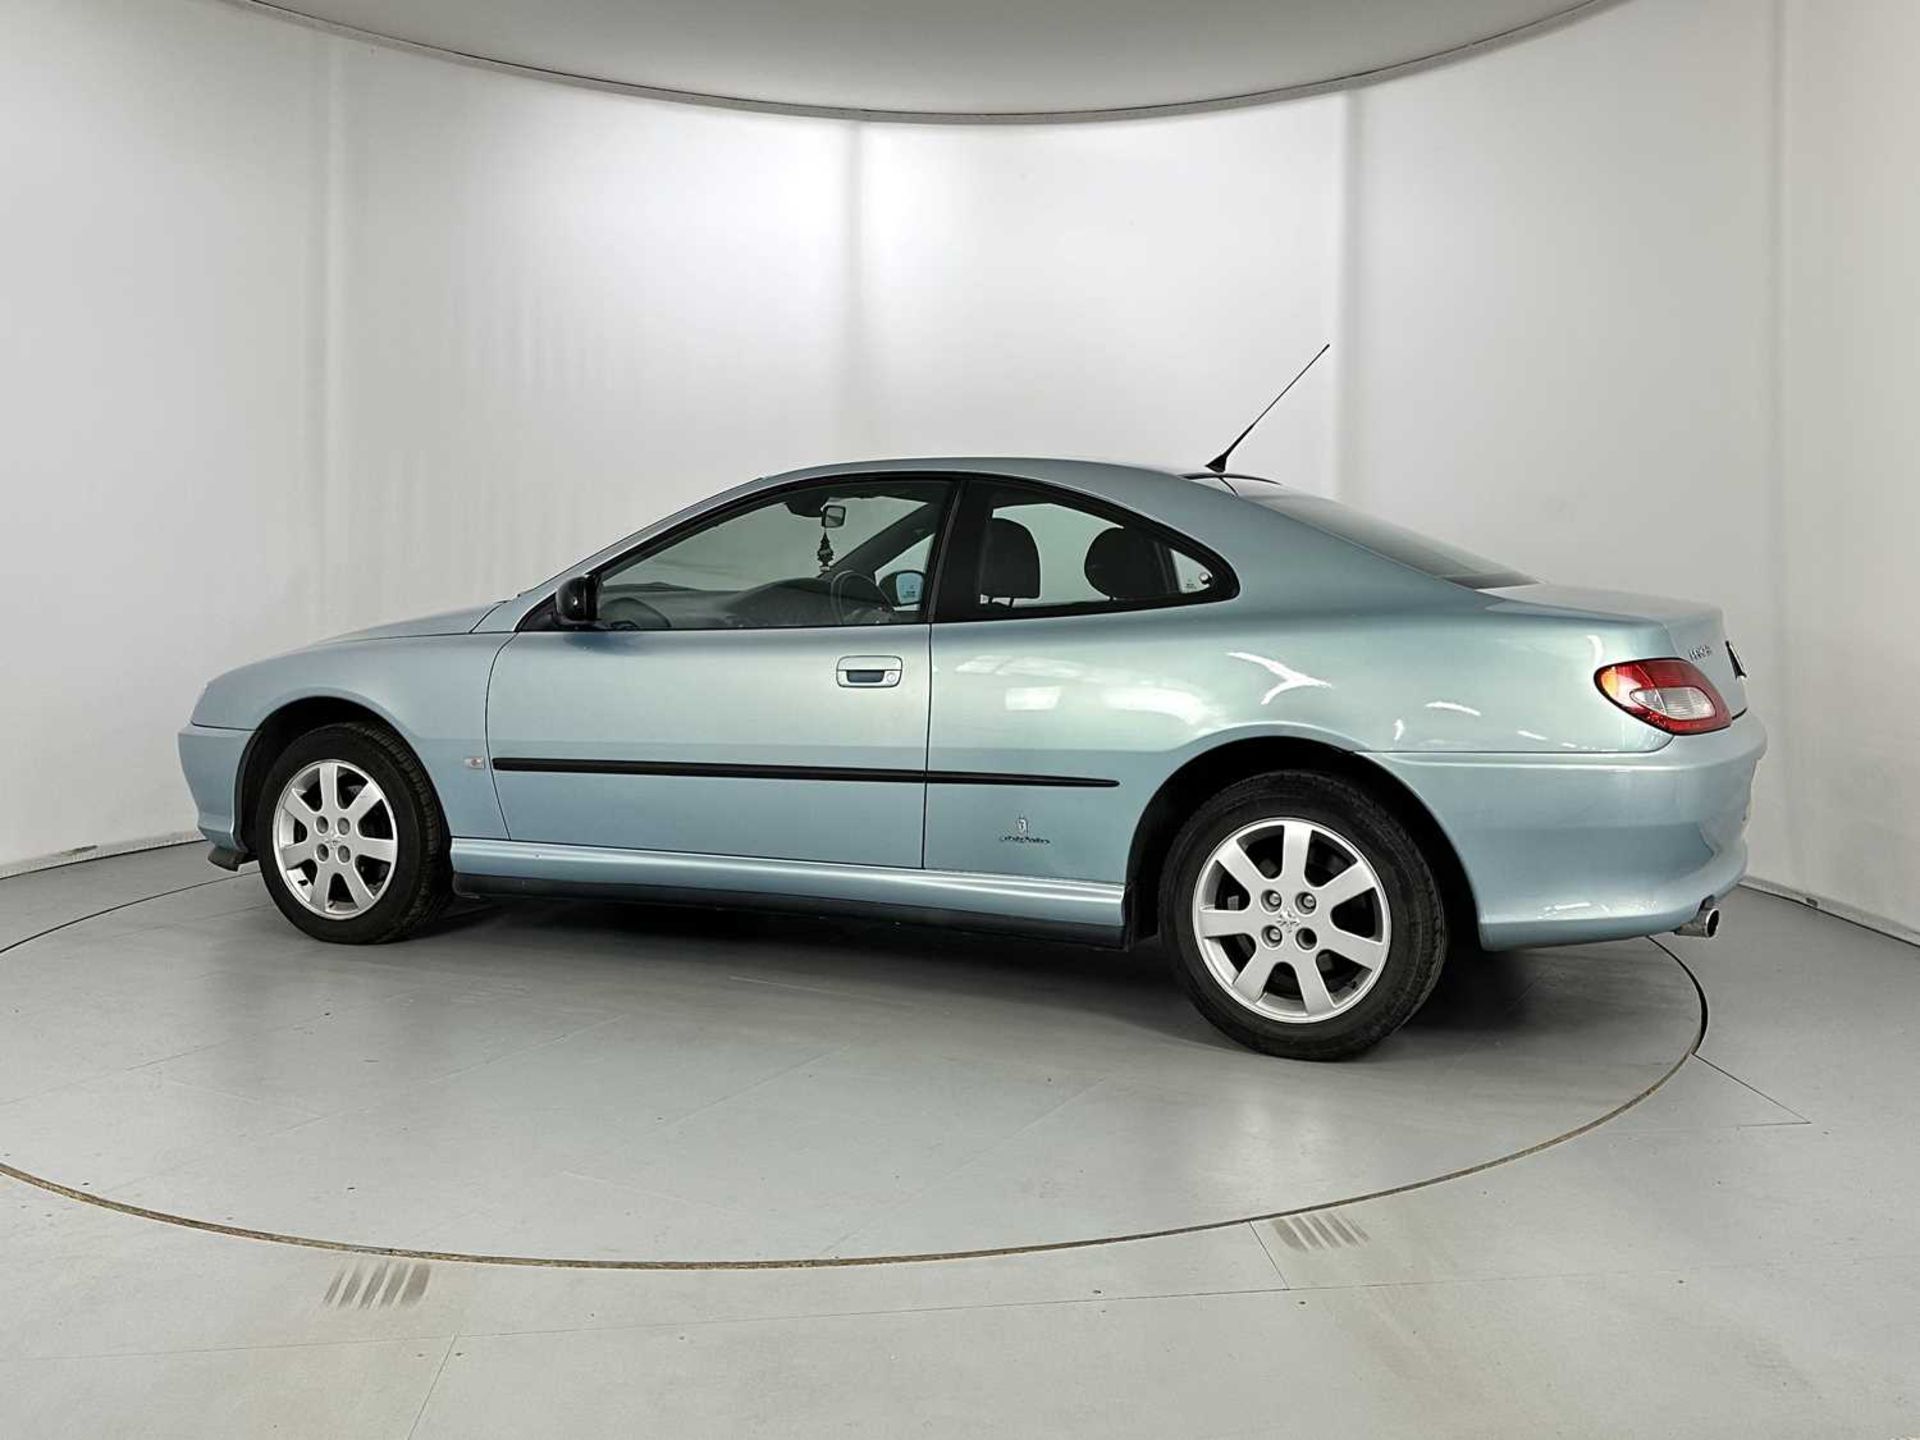 2002 Peugeot 406 Coupe - Image 6 of 28